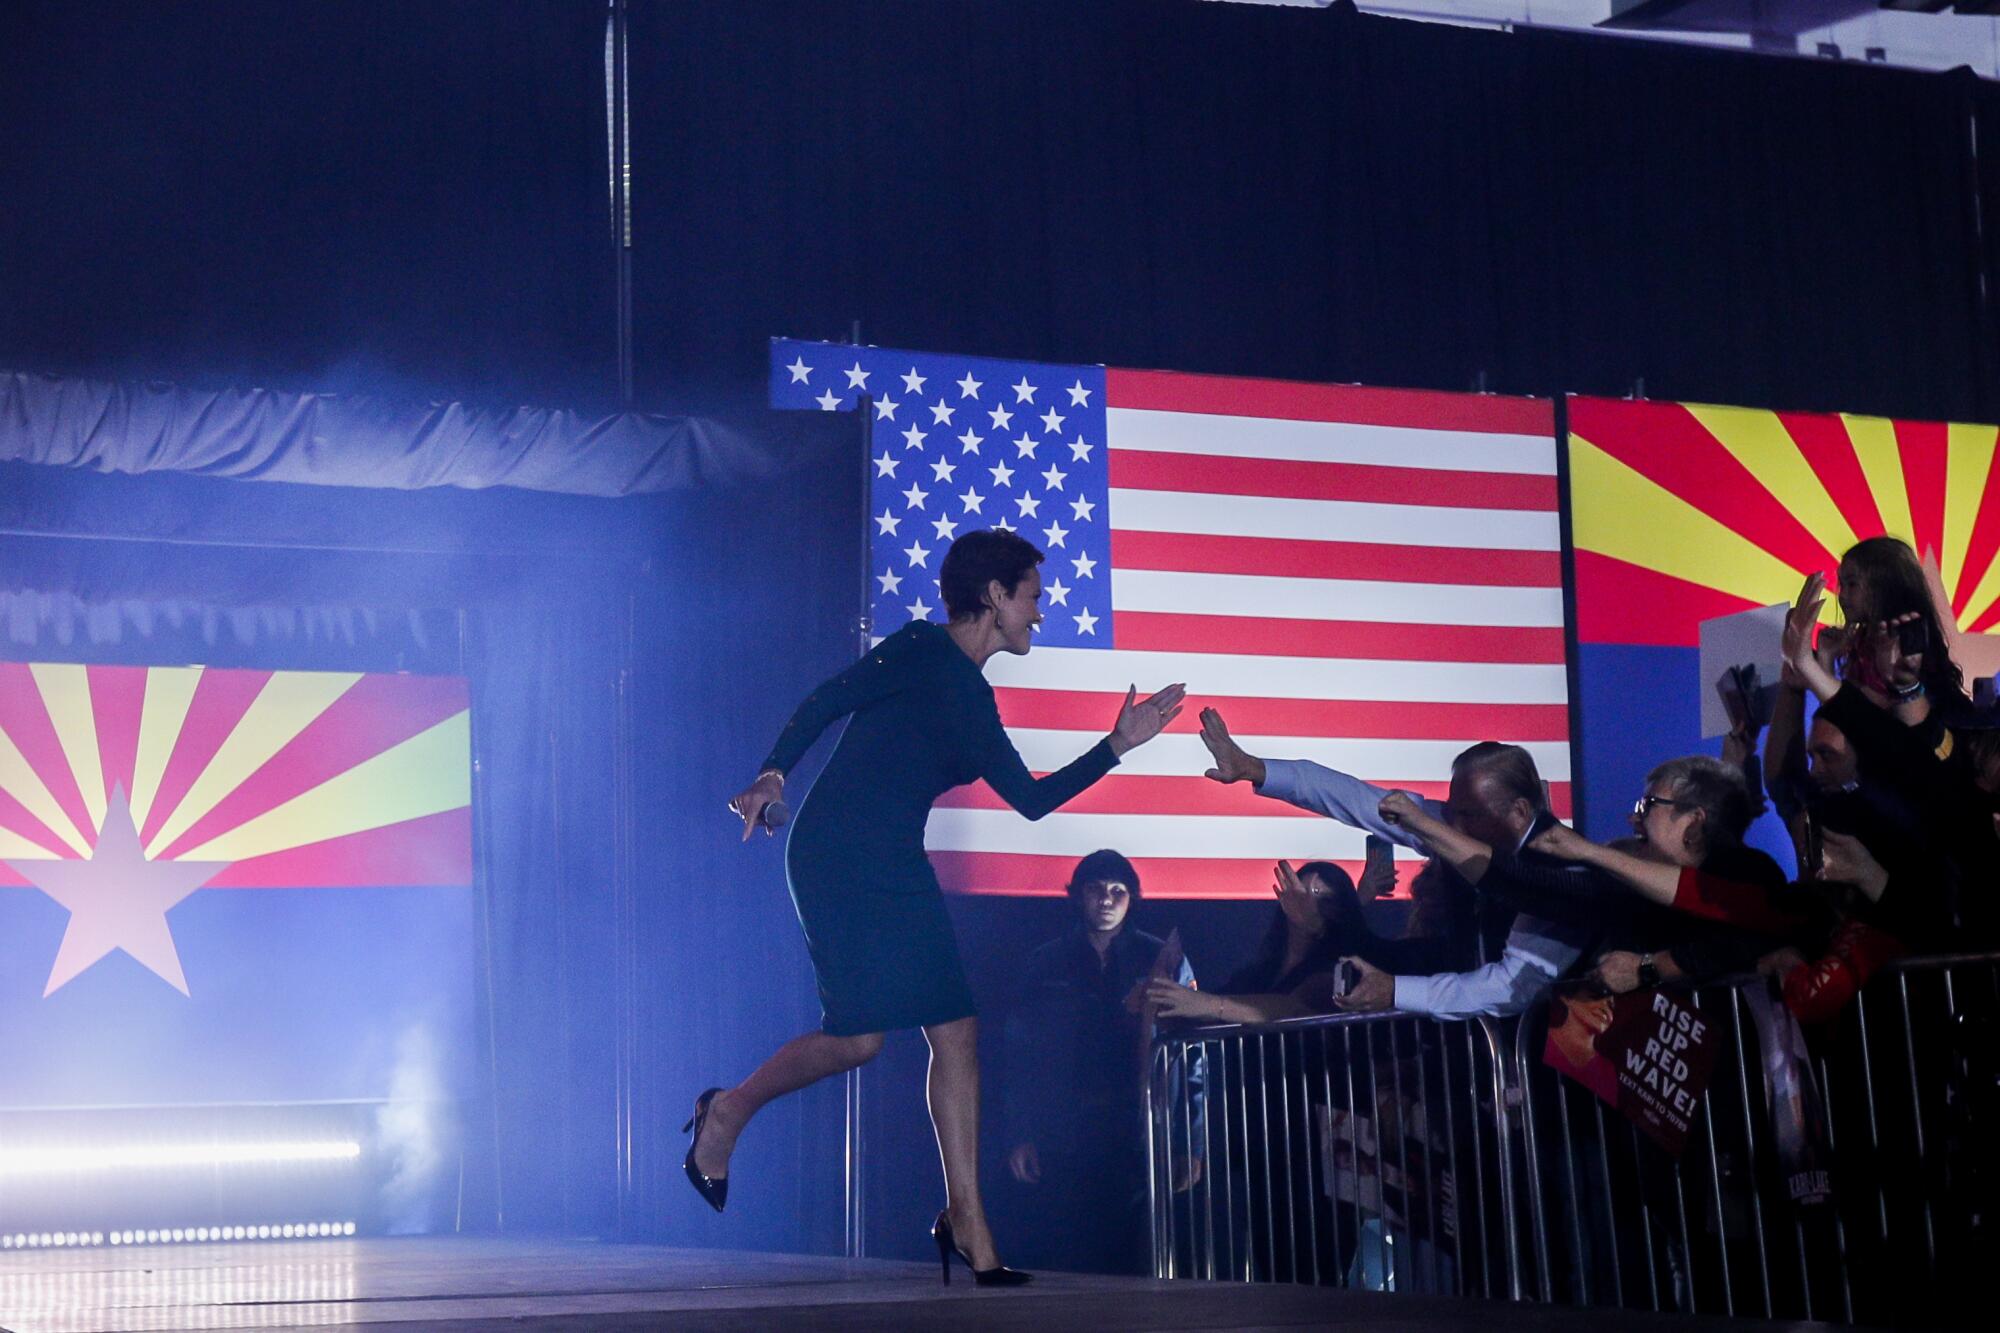 Arizona GOP gubernatorial candidate Karie Lake greets supporters as she takes the stage for a campaign rally